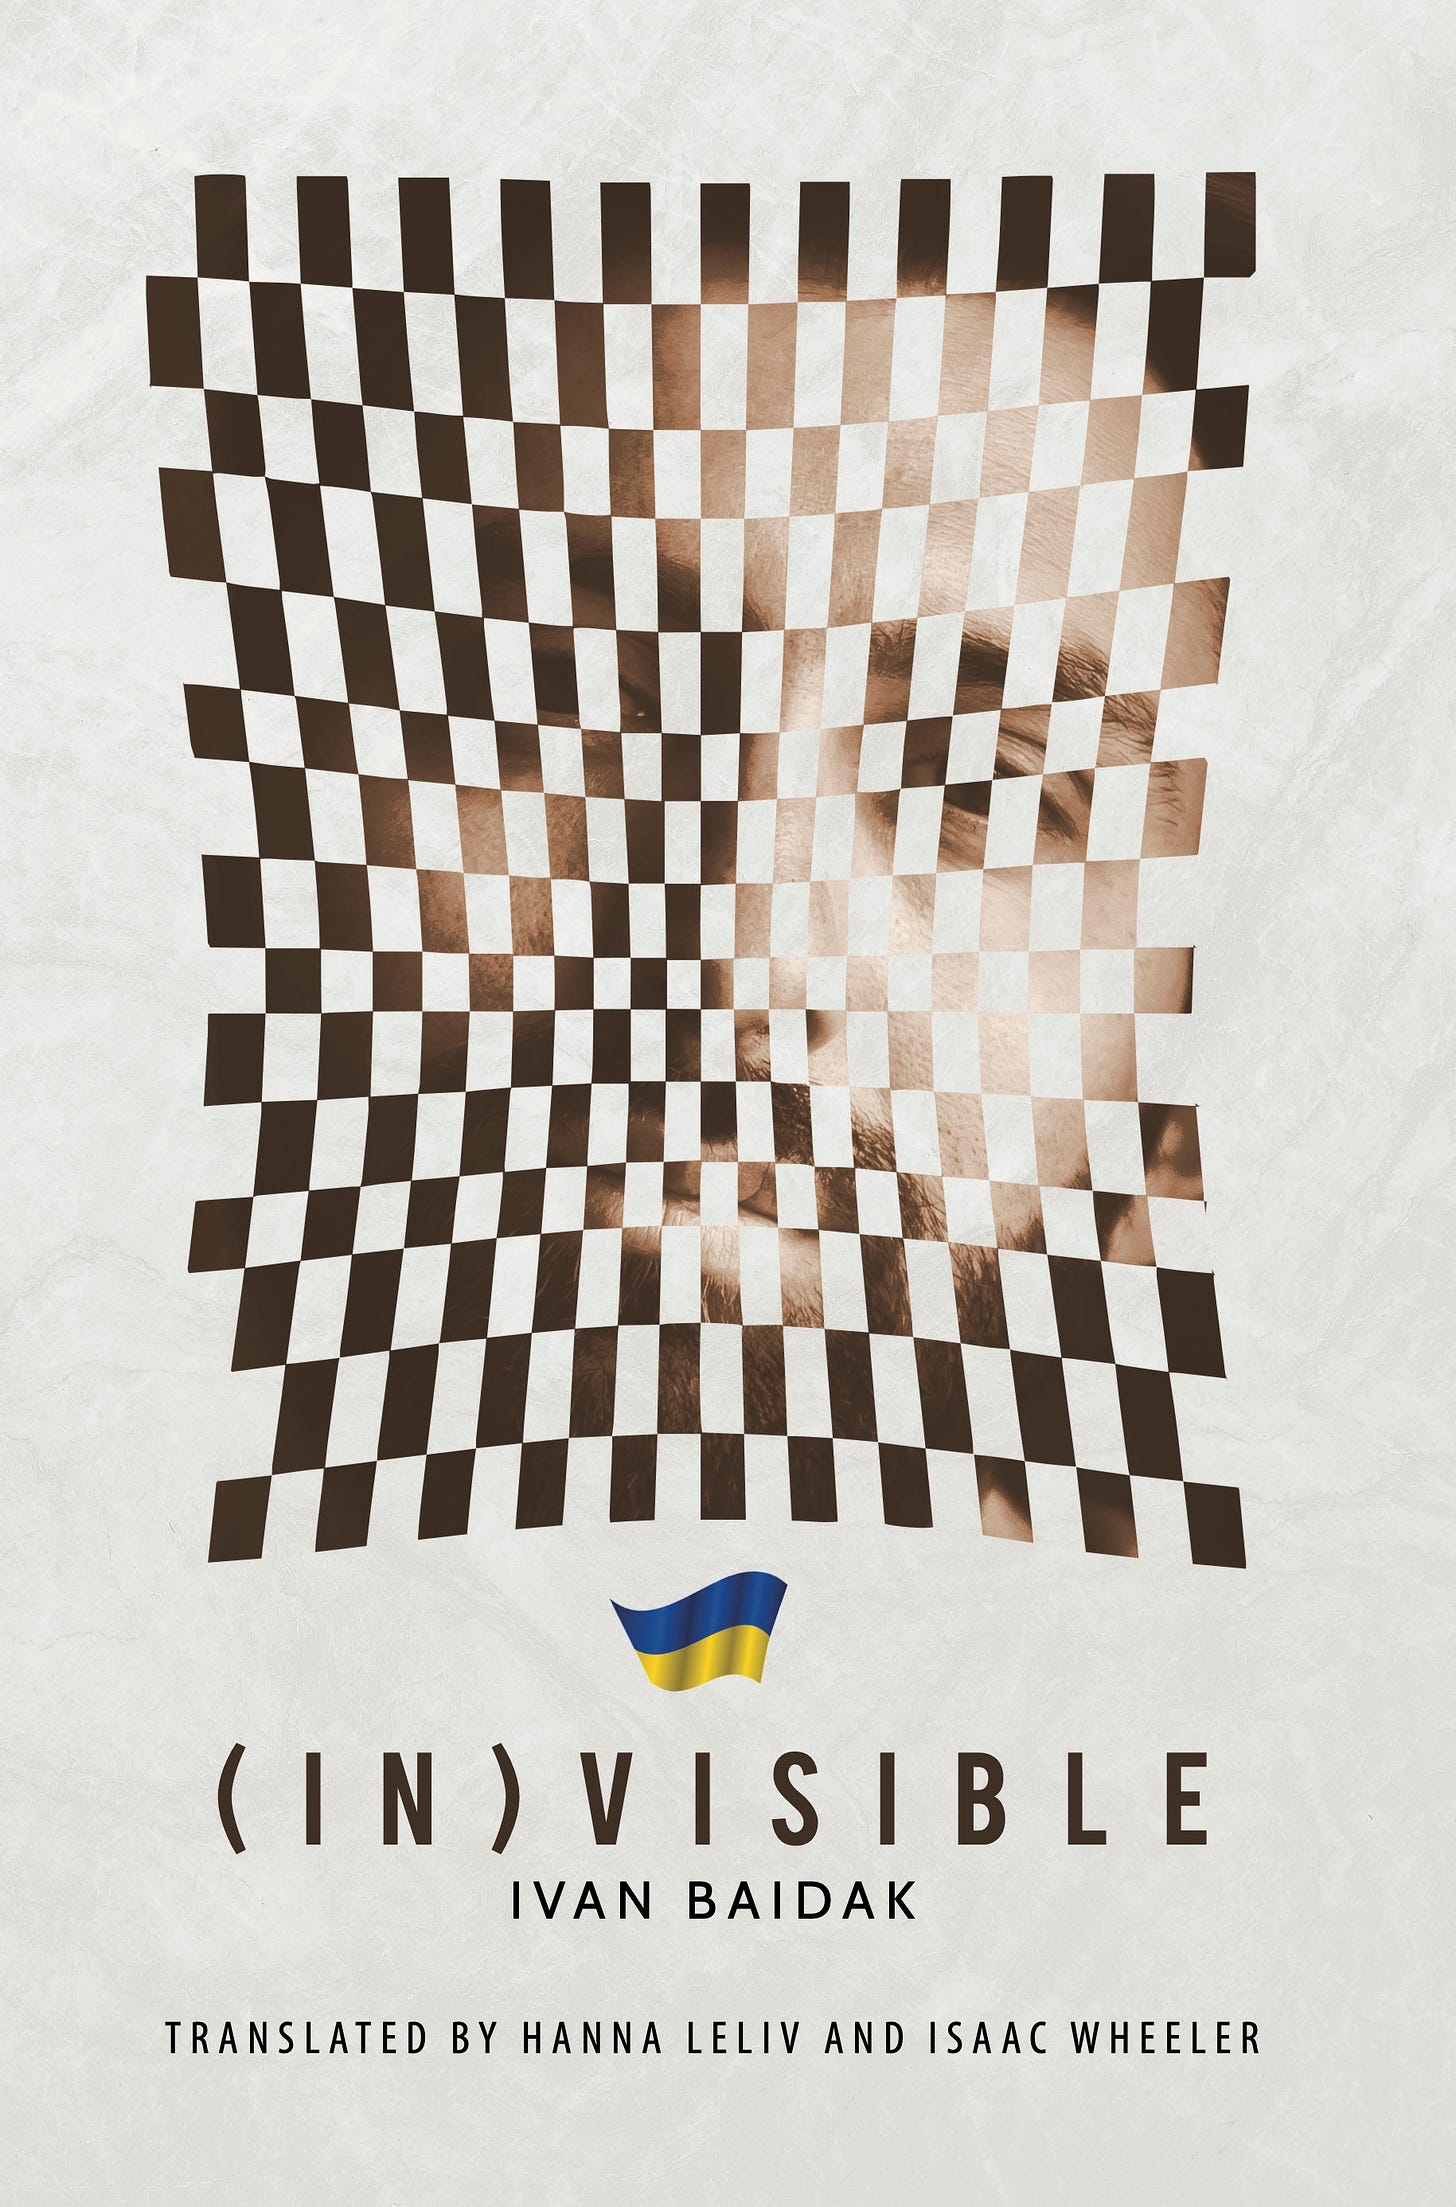 The cover of Ivan Baidak's novel (In)visible shows a light gray background with a white marble design. Over this is a photo of the author's face in sepia behind a sparse, brown checkerboard collage. Underneath the image is a small, waving Ukrainian flag. The text reads "(IN)VISIBLE" (in brown type), "Ivan Baidak, Translated by Hanna Leliv and Isaac Wheeler" (in brown type). Jacket design: Allen Jomoc.